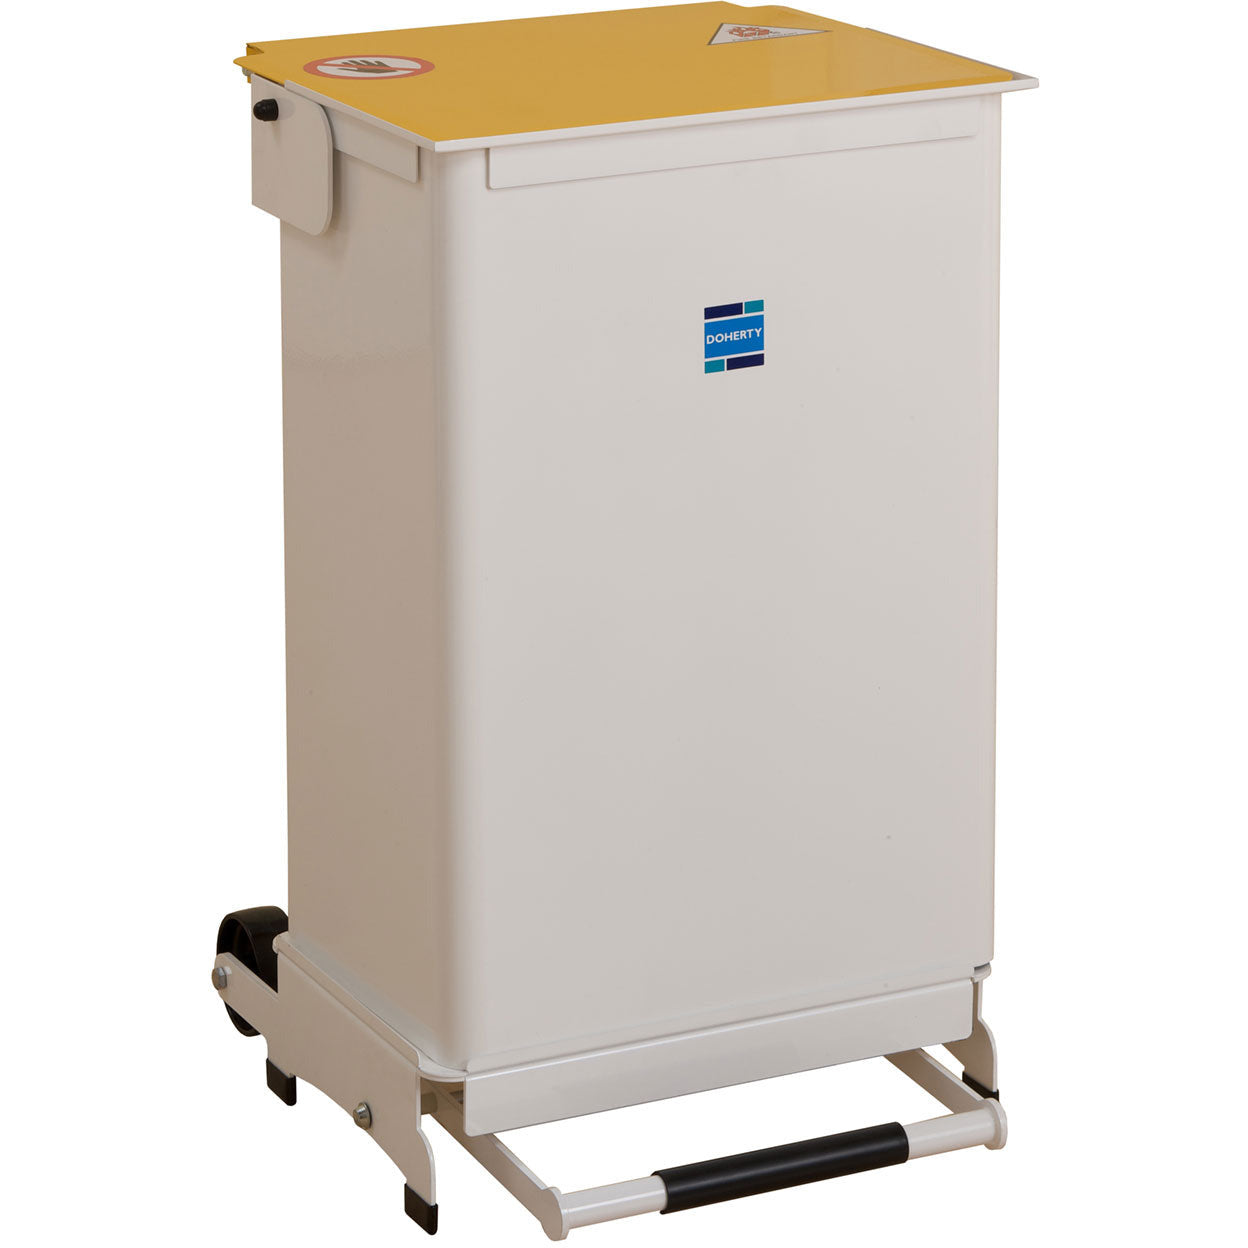 50 Litre Kendal Waste Bin with Removable Body, Yellow Lid